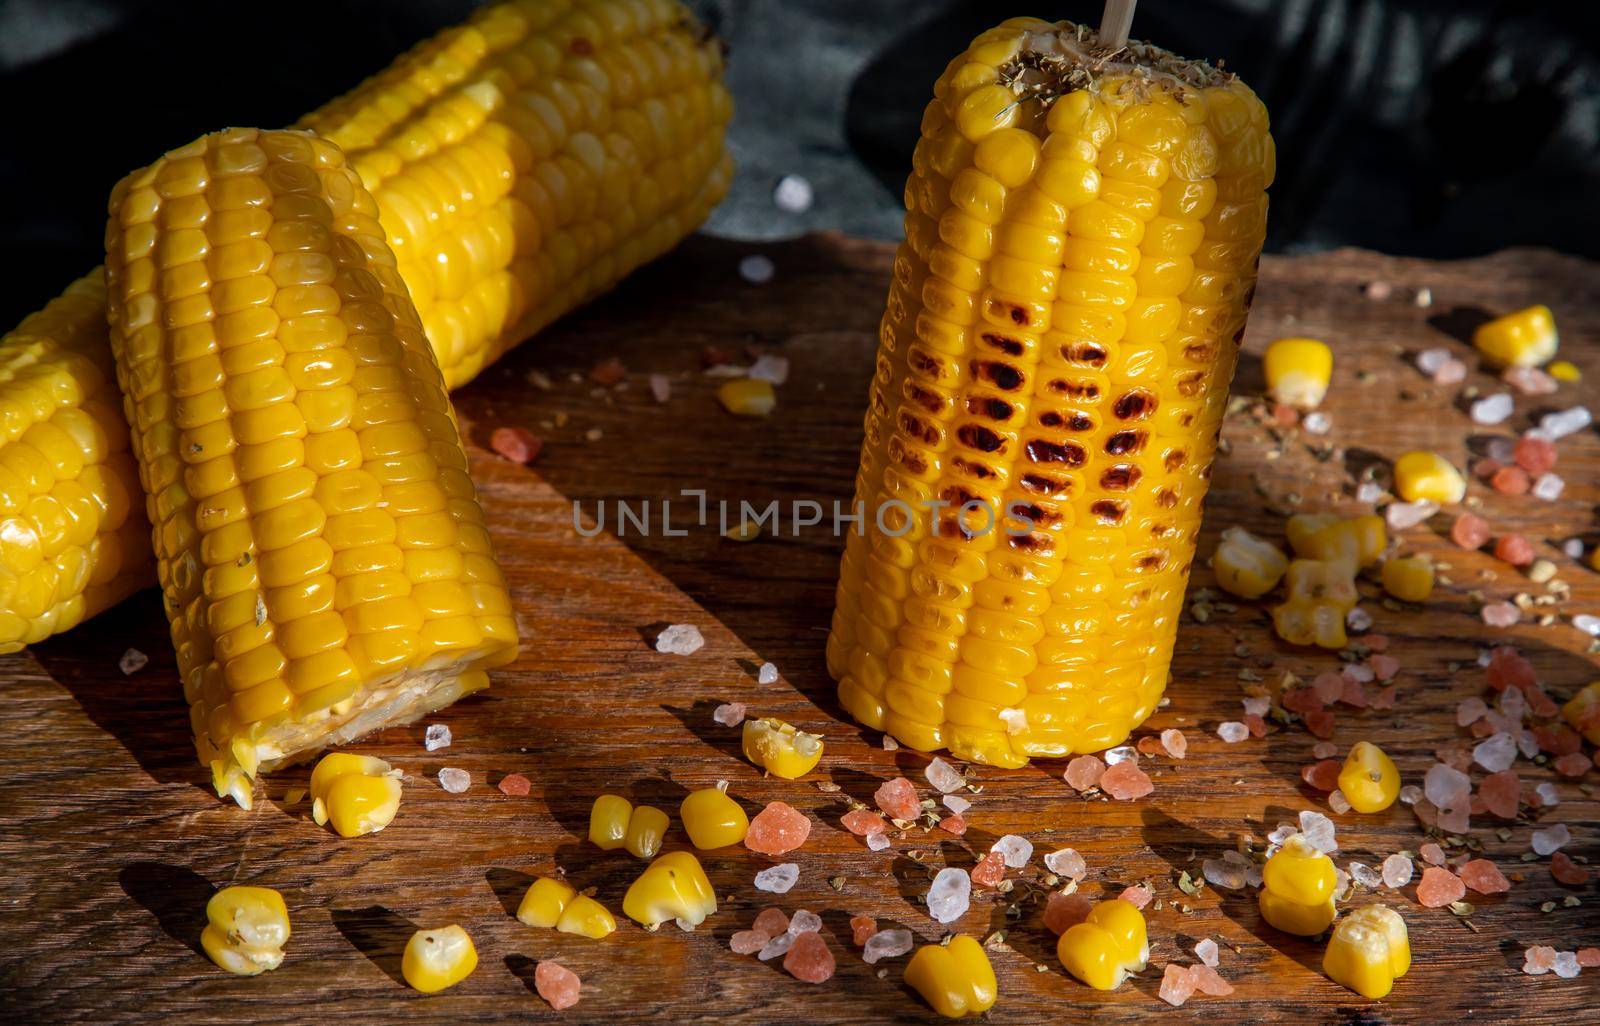 Grilled corn on the cob  on rustic wooden board   over dark background. Ideas for barbecue and grill parties, Barbecue concept.